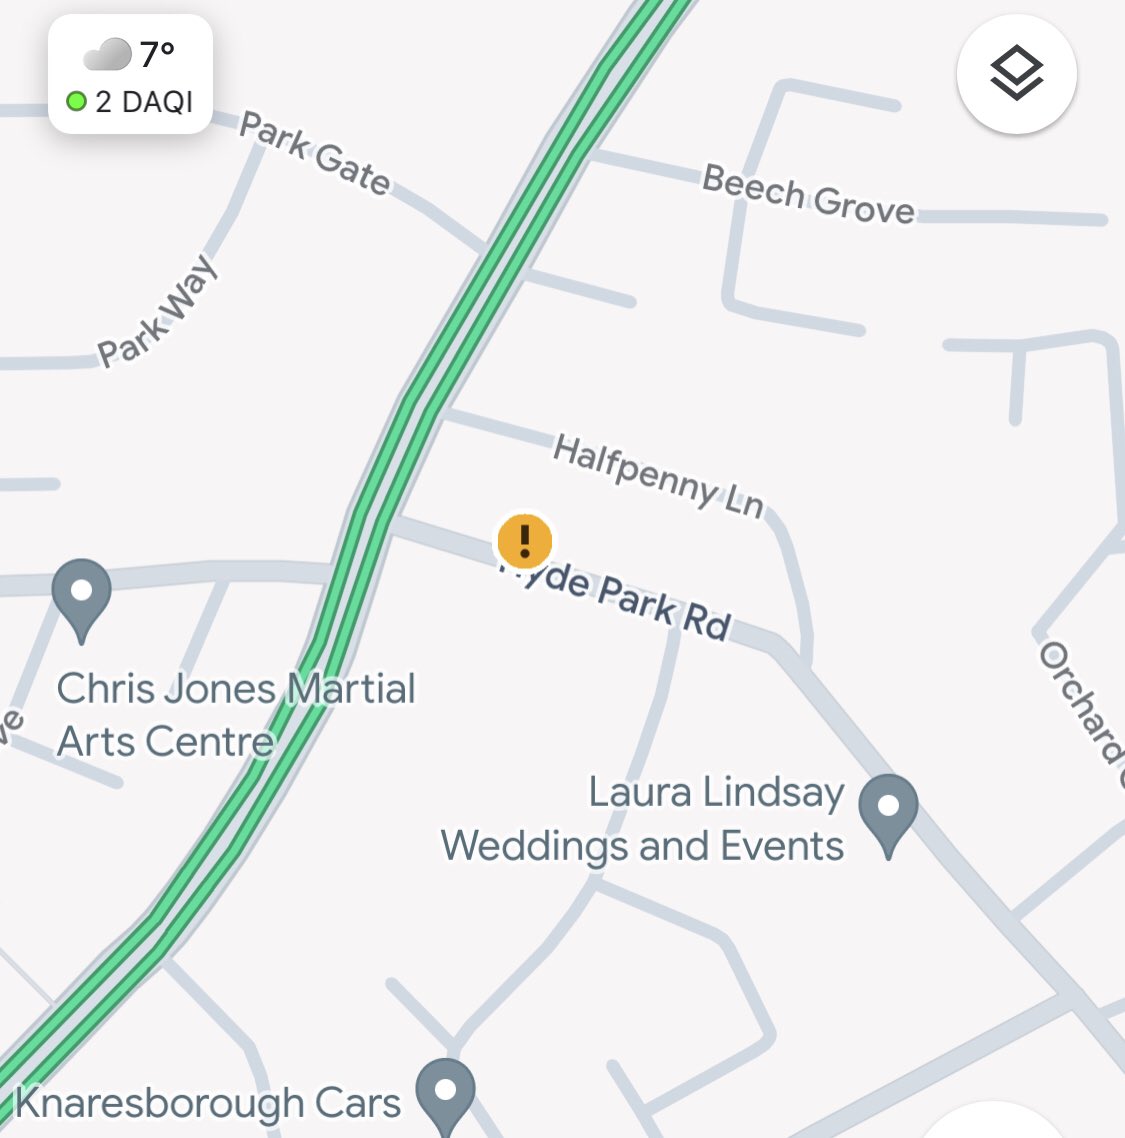 🚨TRAVEL🚨 Some good news for #Knaresborough, the closure of Hyde Park Road at the junction with Boroughbridge Road will be lifted this evening. 

Half Penny remains closed near Old Penny Gate 🚧

Thanks @morrison_water for letting us know 👍🏻